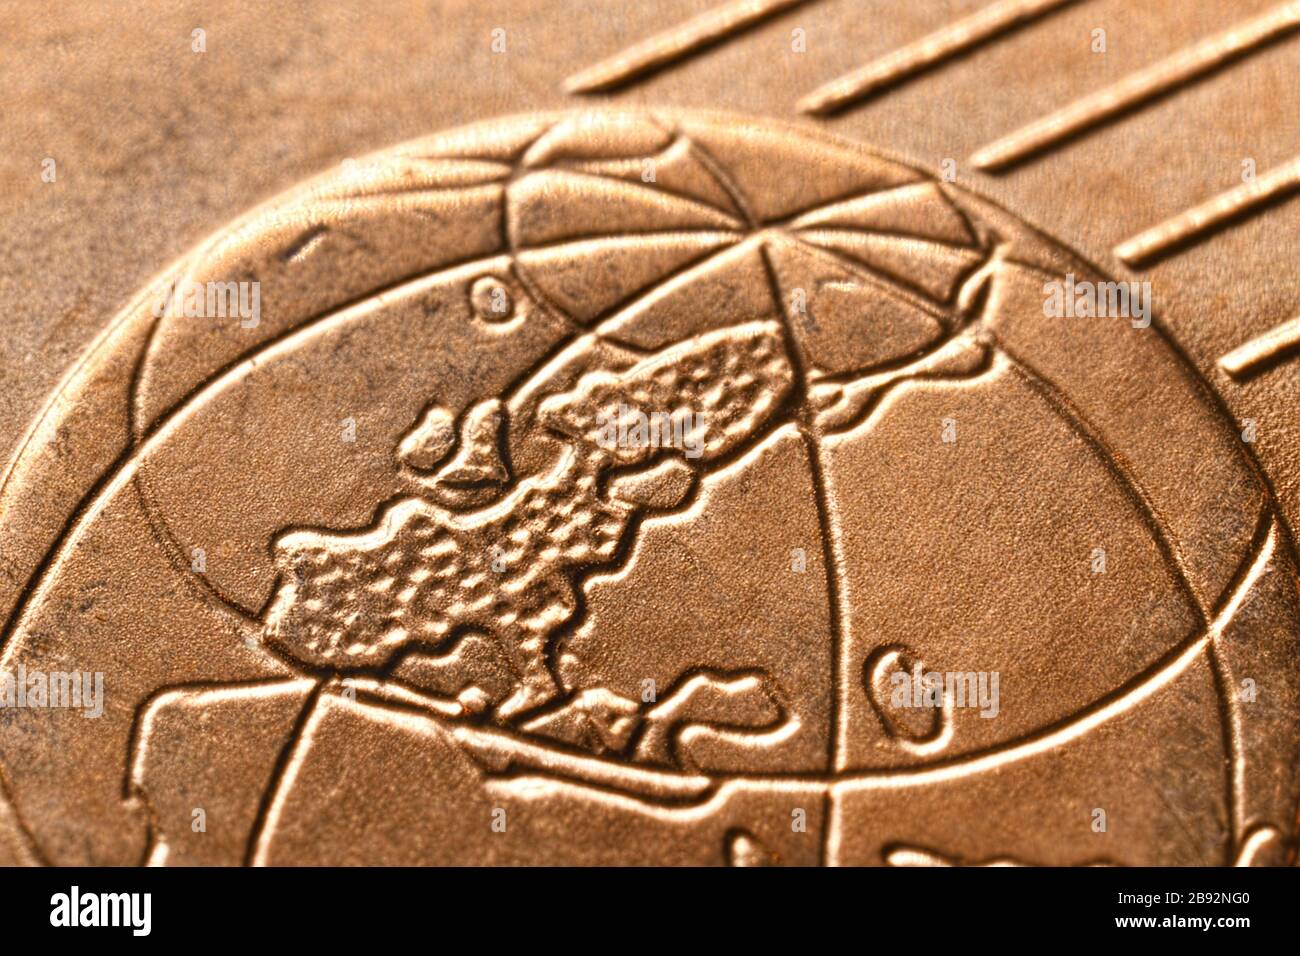 Close-up of a cent coin, symbolic photo for the planned abolition of 1-and 2-cent coins, Nahaufnahme einer Centmünze, Symbolfoto für die geplante Absc Stock Photo